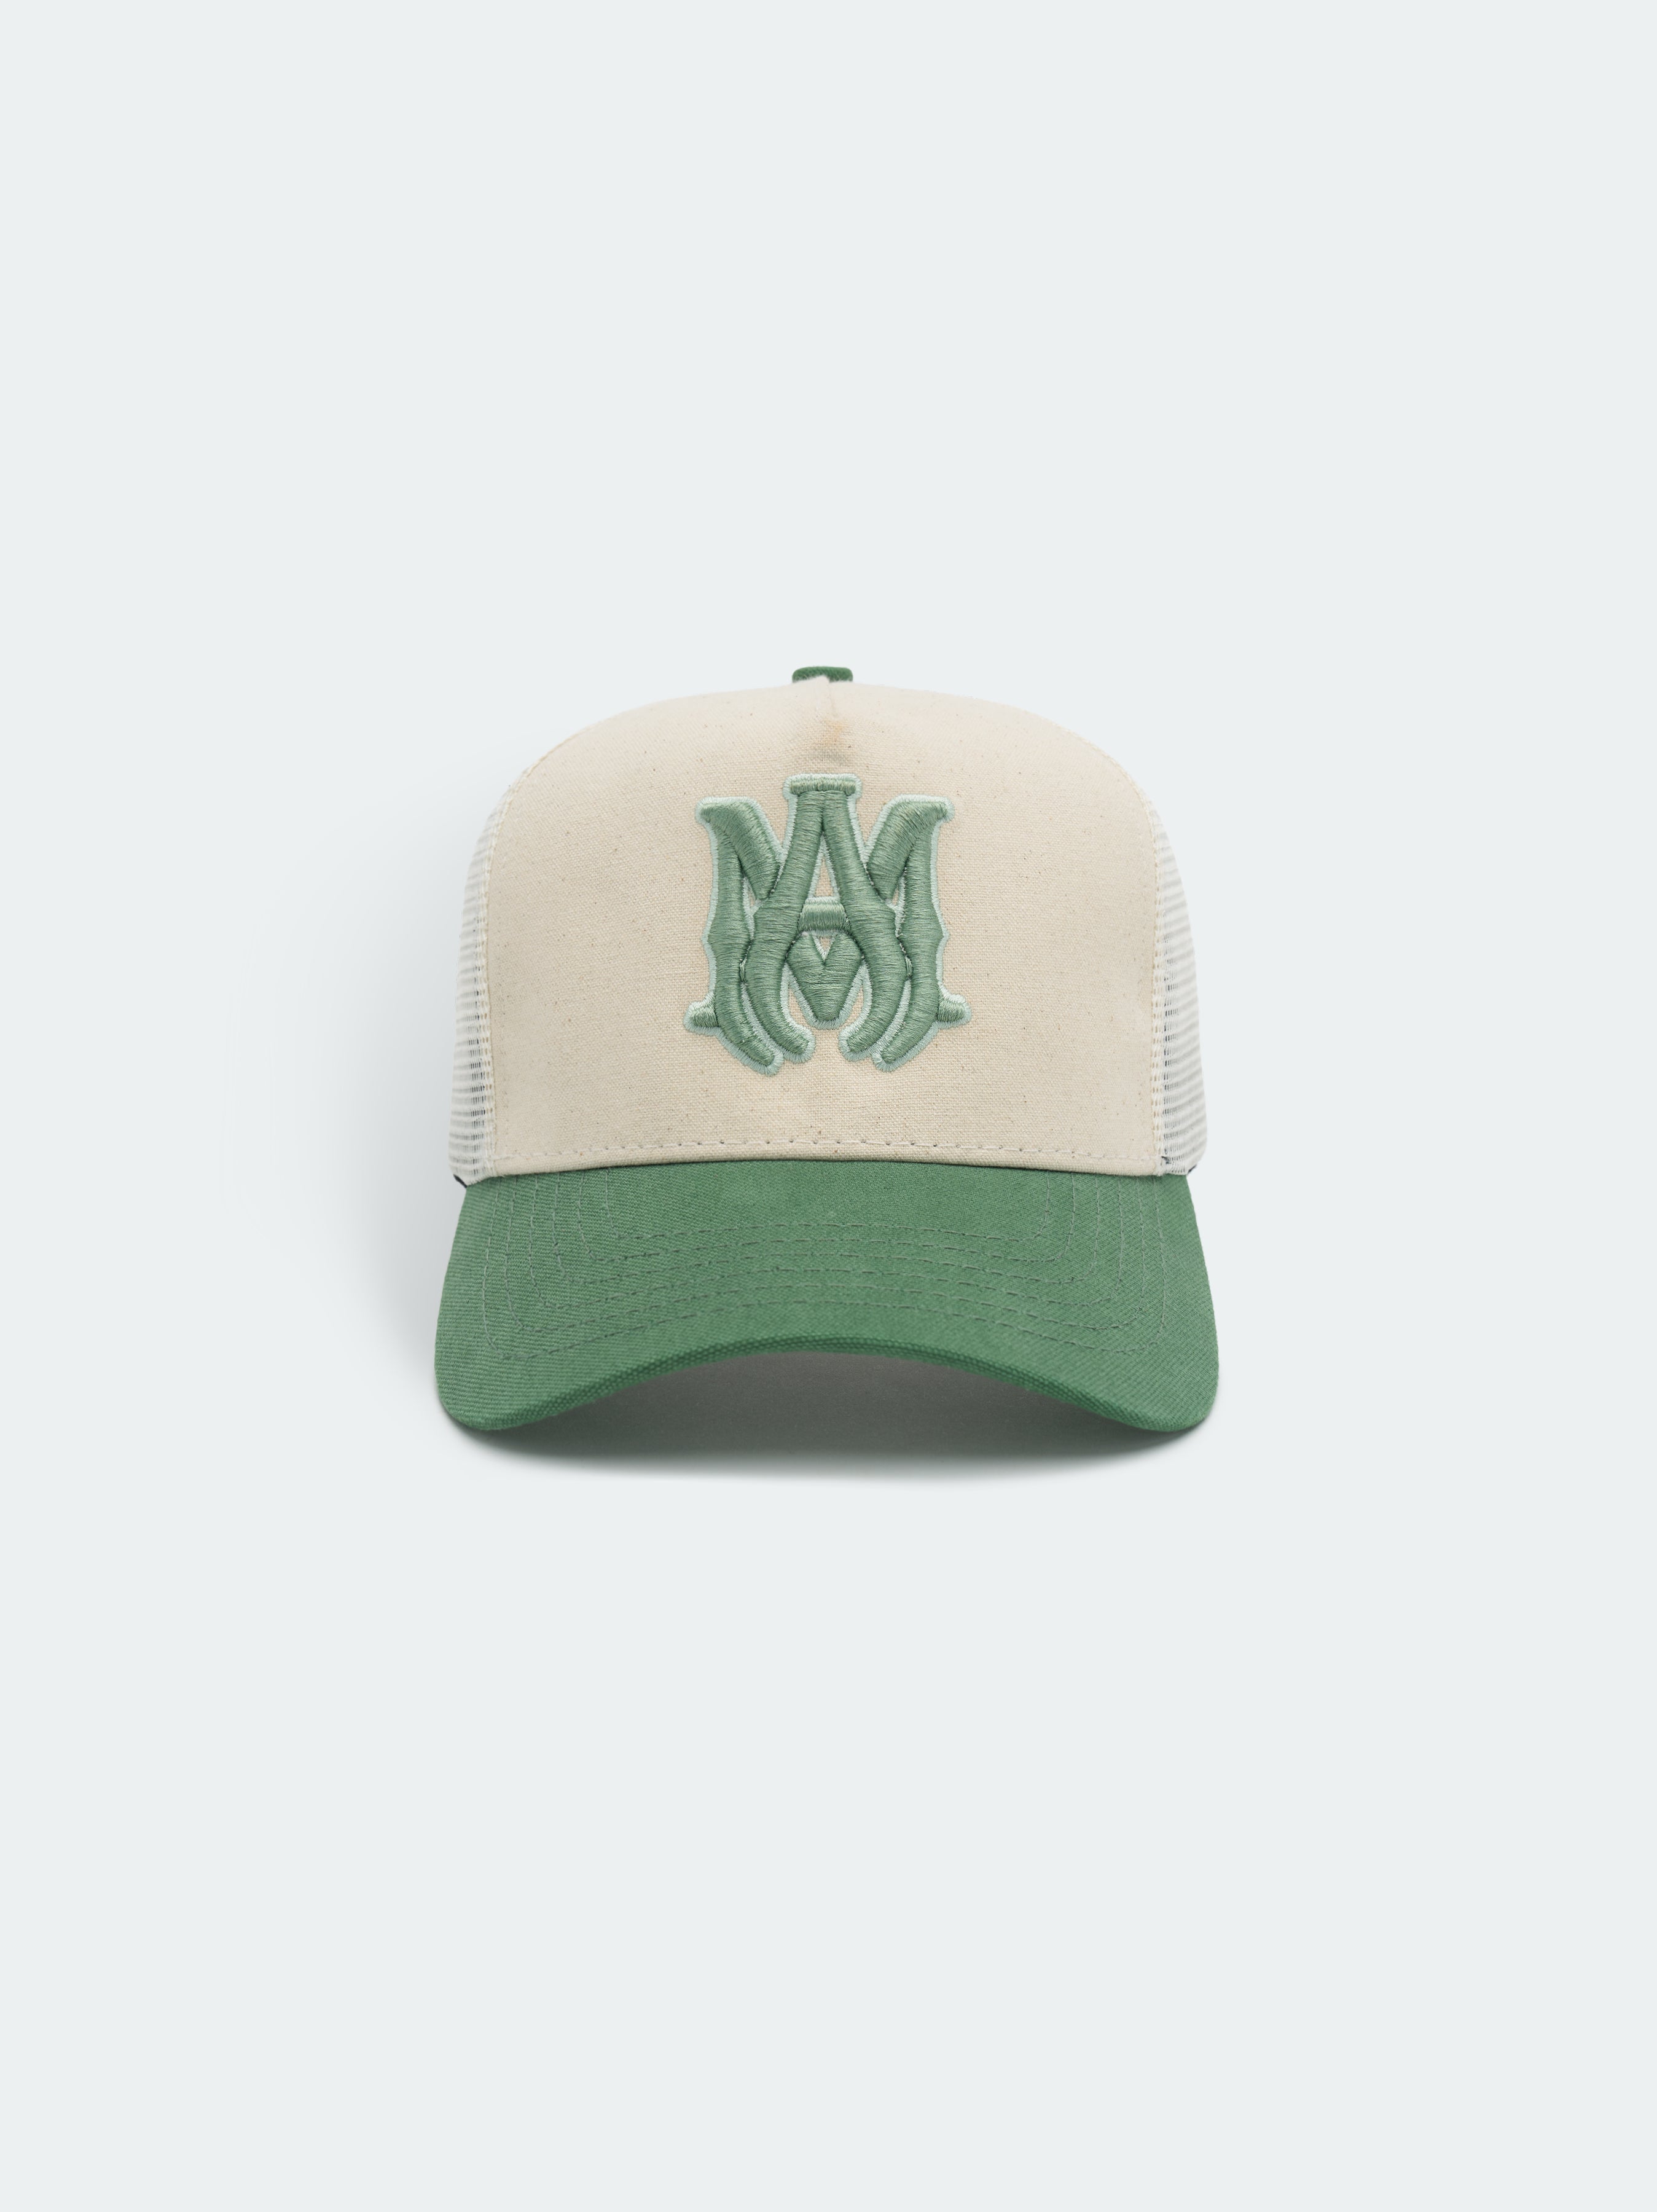 Product TWO TONE MA TRUCKER HAT - Natural Mineral Green featured image